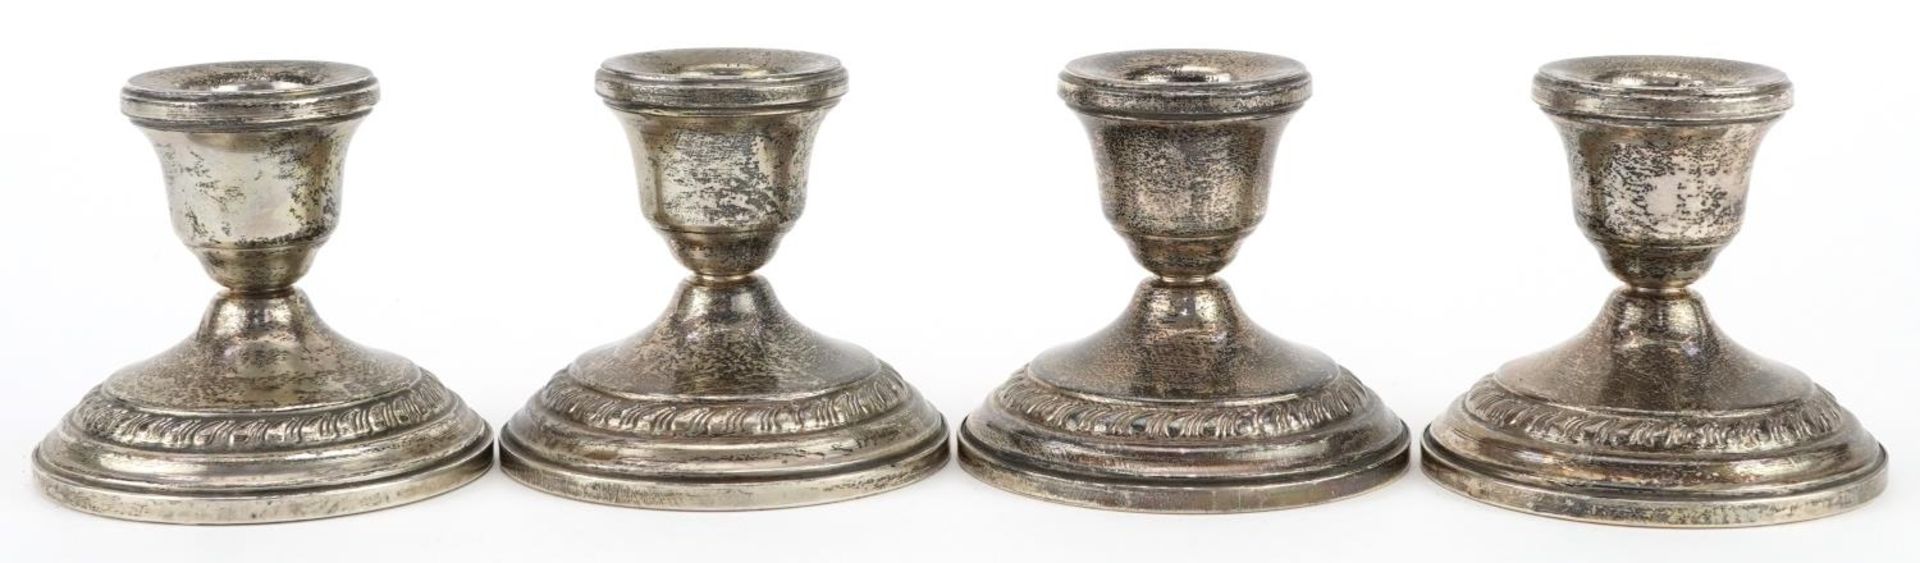 Columbia, set of four circular sterling silver weighted dwarf candlesticks, 8cm in diameter, total